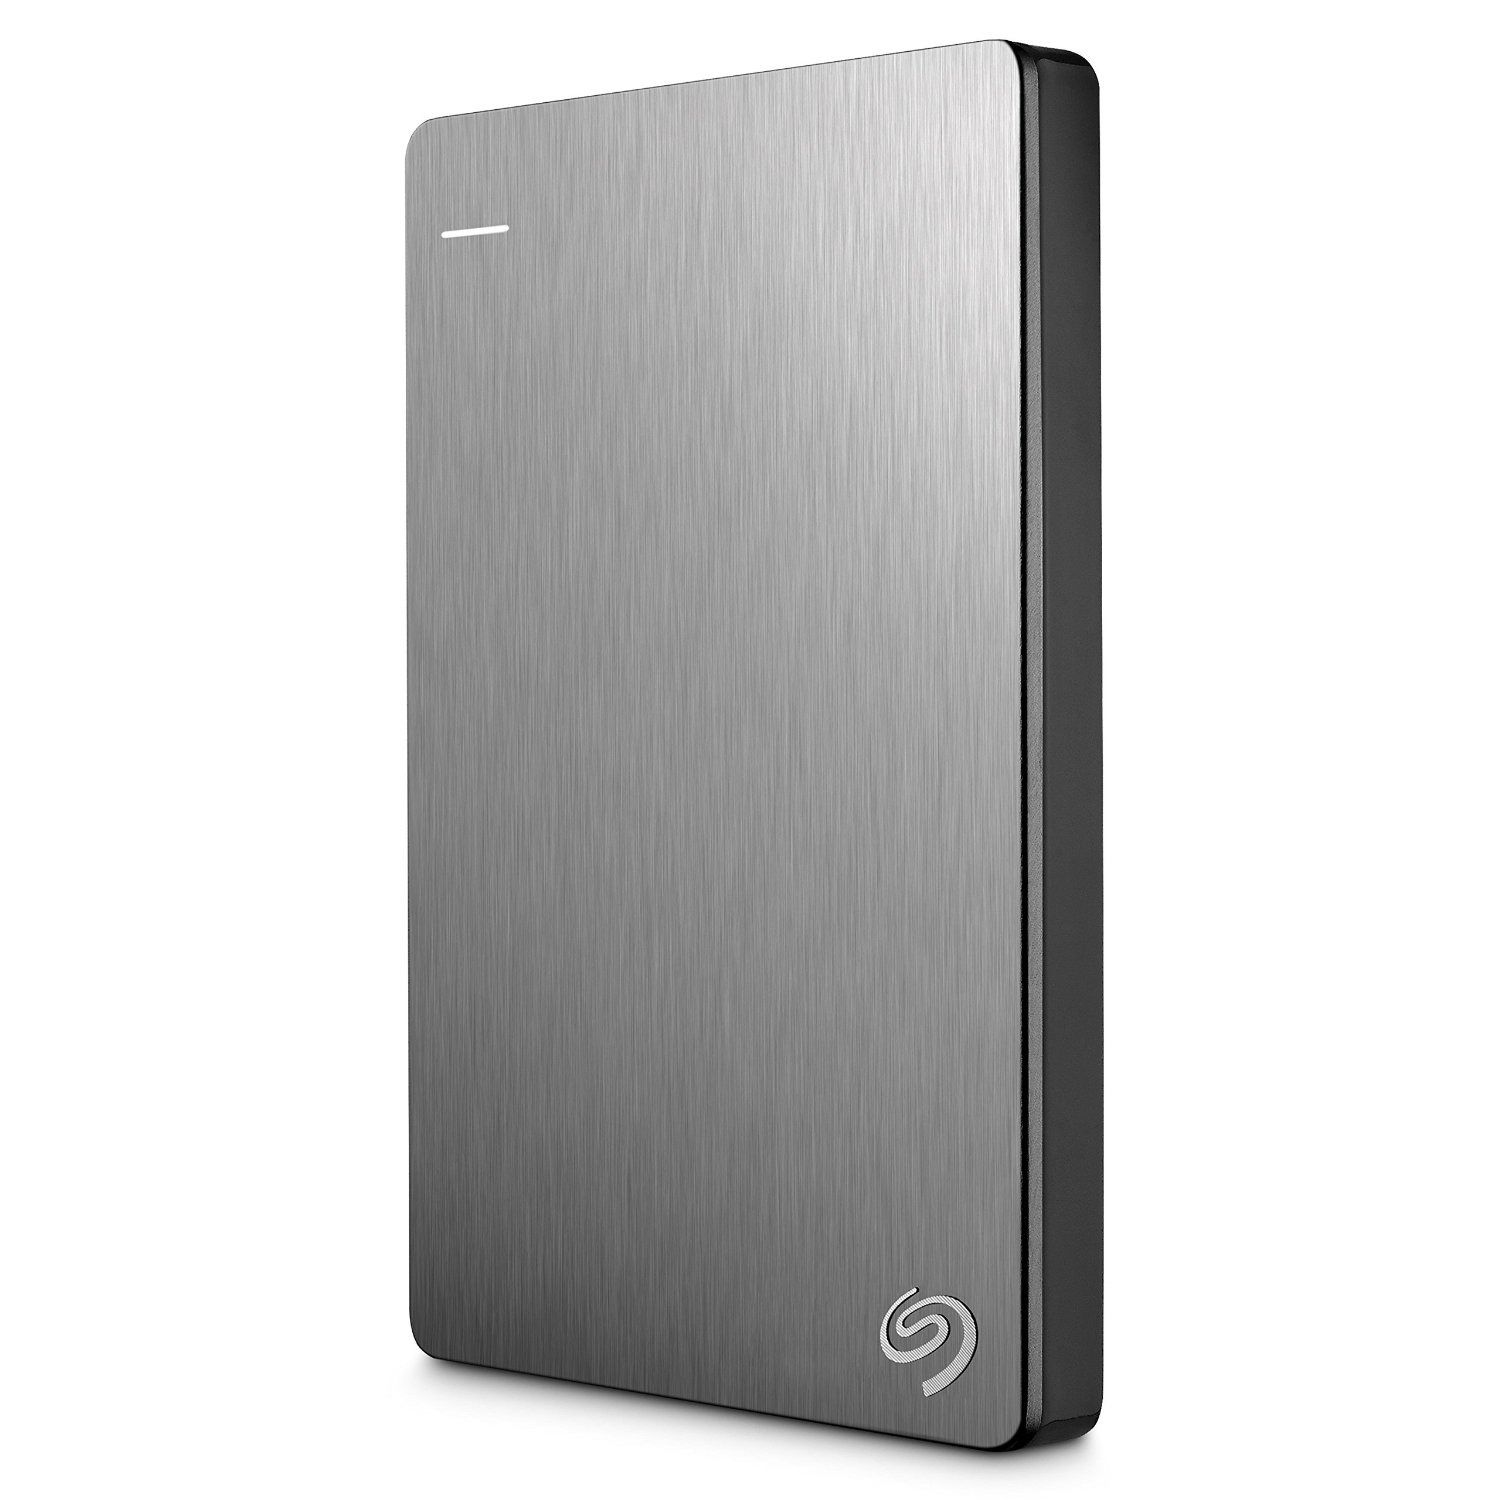 Seagate Backup Plus Slim 2TB USB 3.0 Portable 2.5 Inch External Hard Drive for PC and Mac, Silver